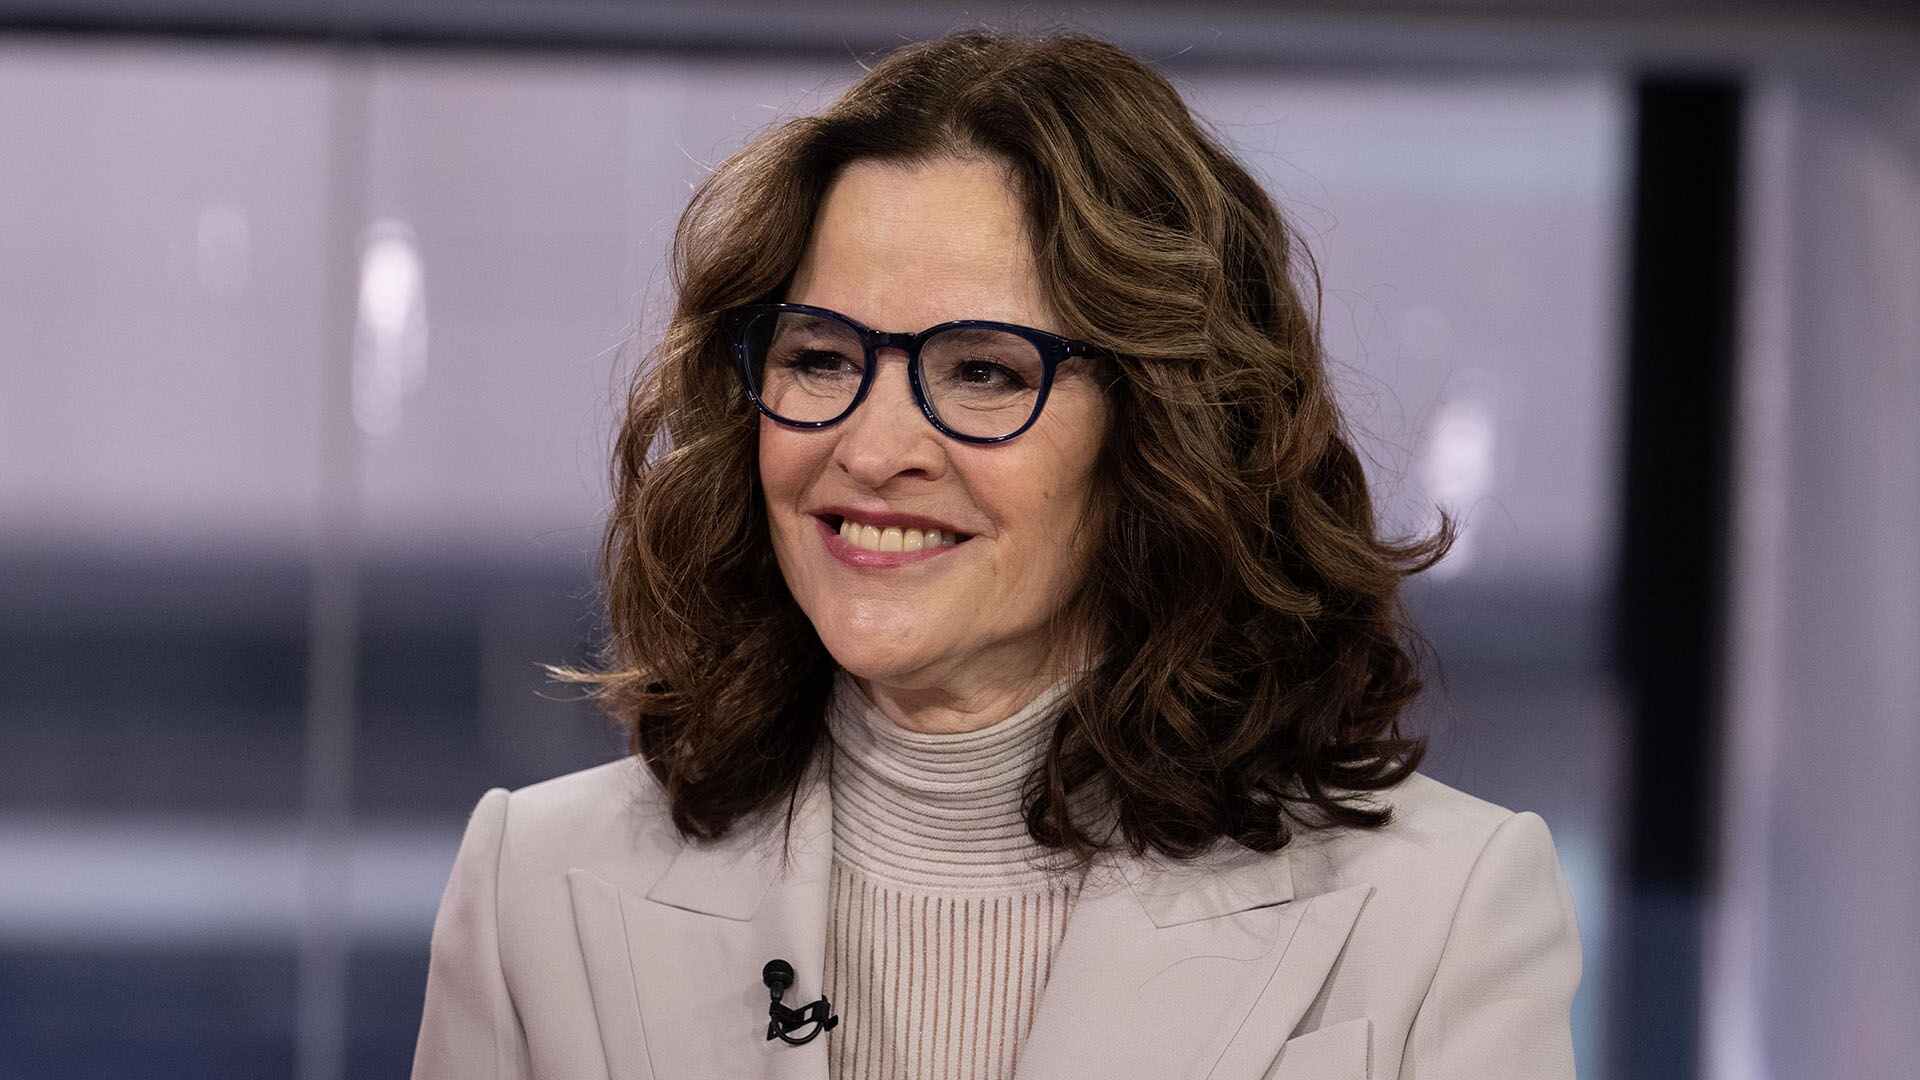 Ally Sheedy Net Worth - An Iconic Journey From New York's Rising Talent To Hollywood Star